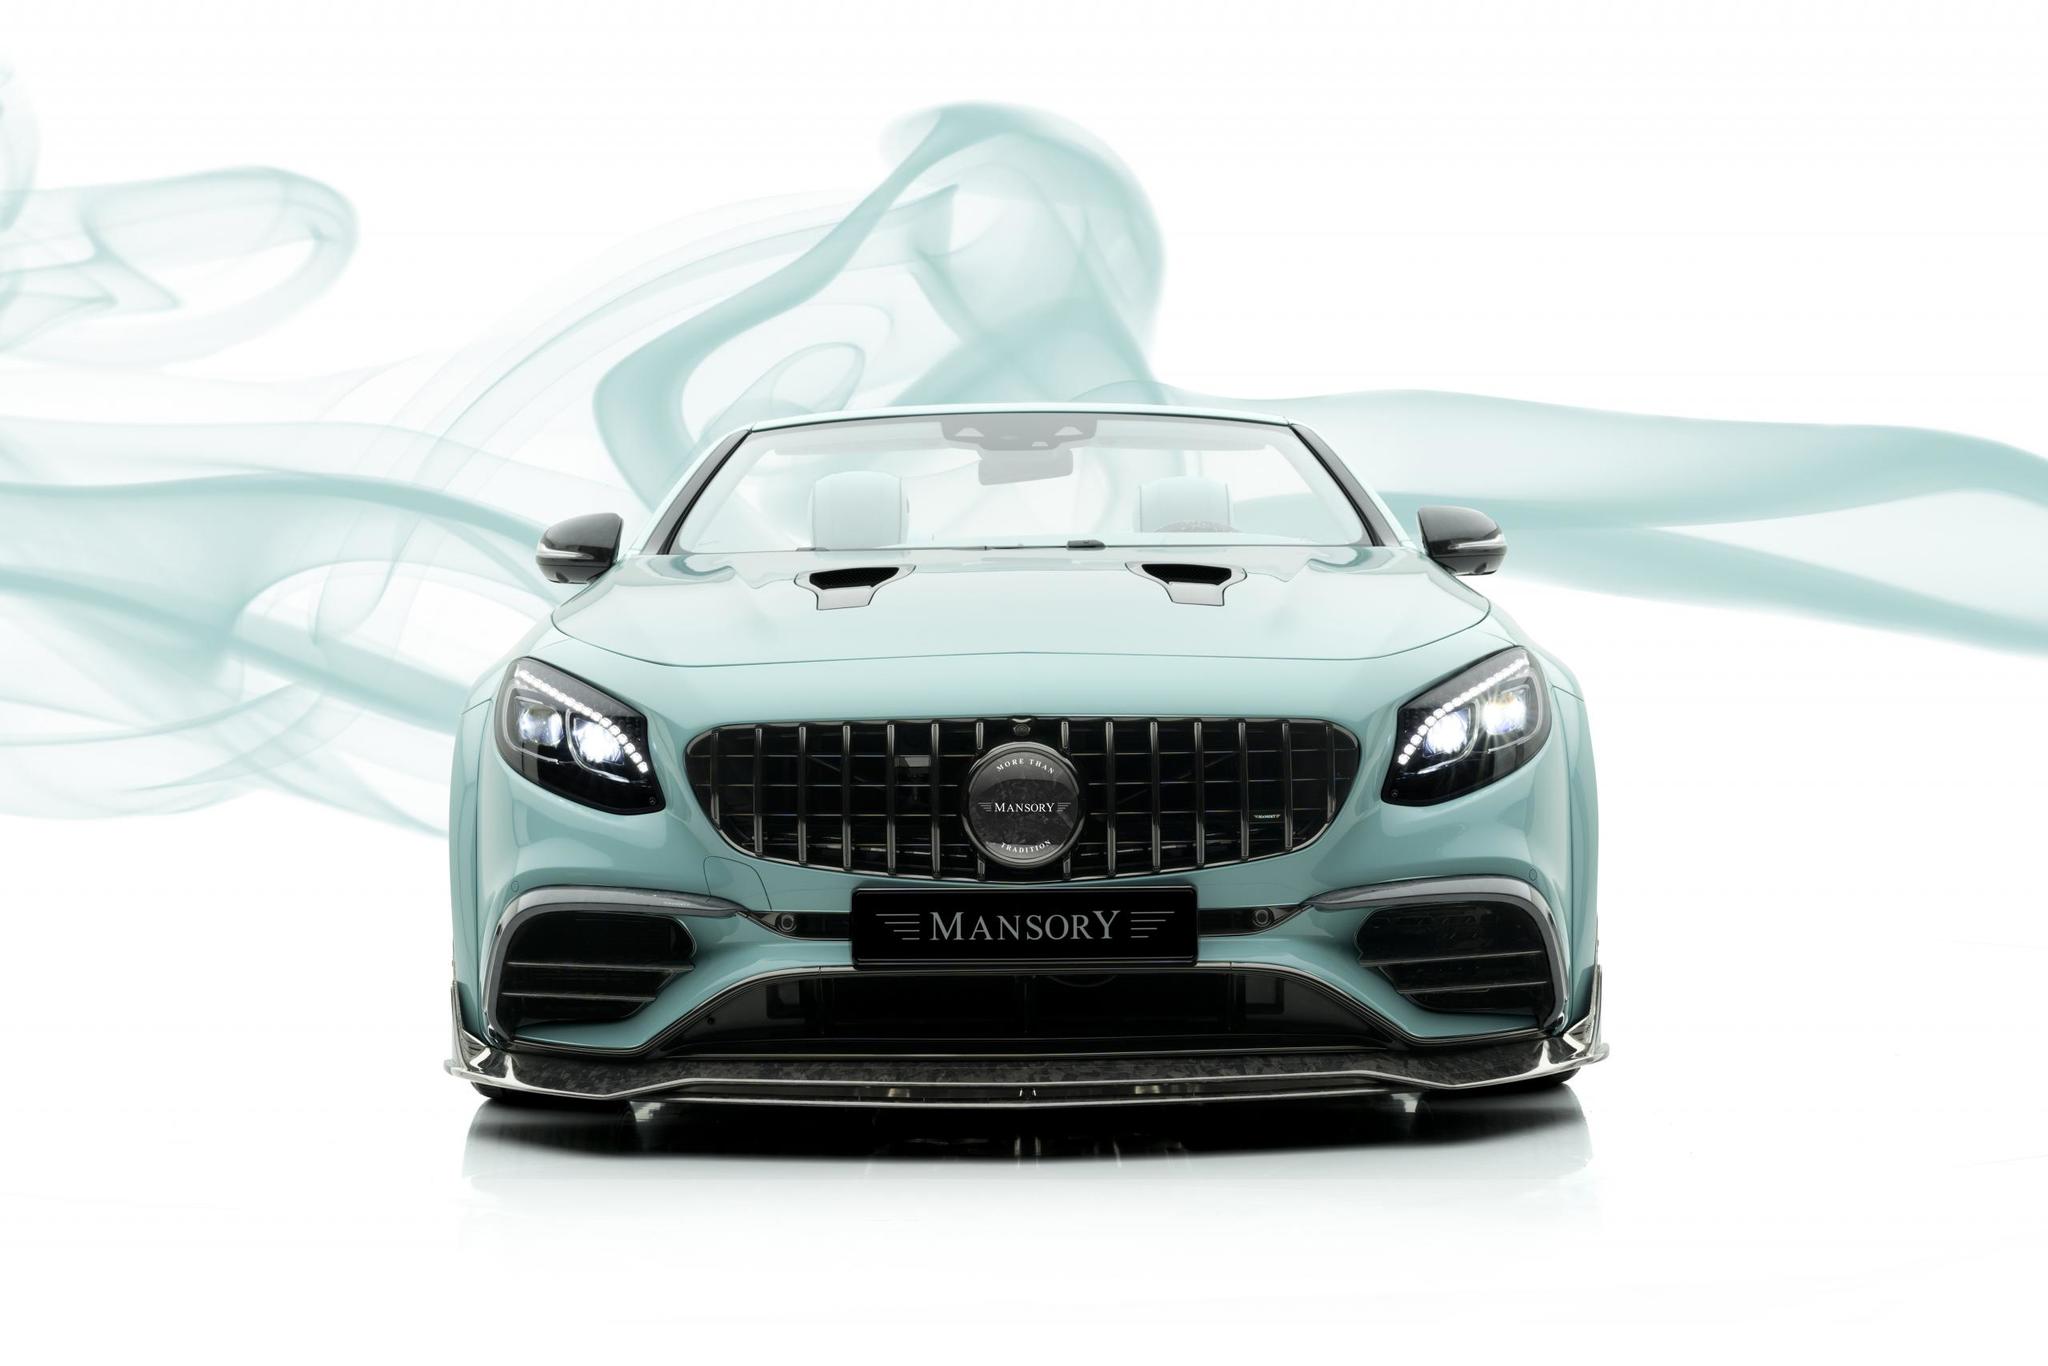 Mansory body kit for Mercedes S-Class Coupe carbon